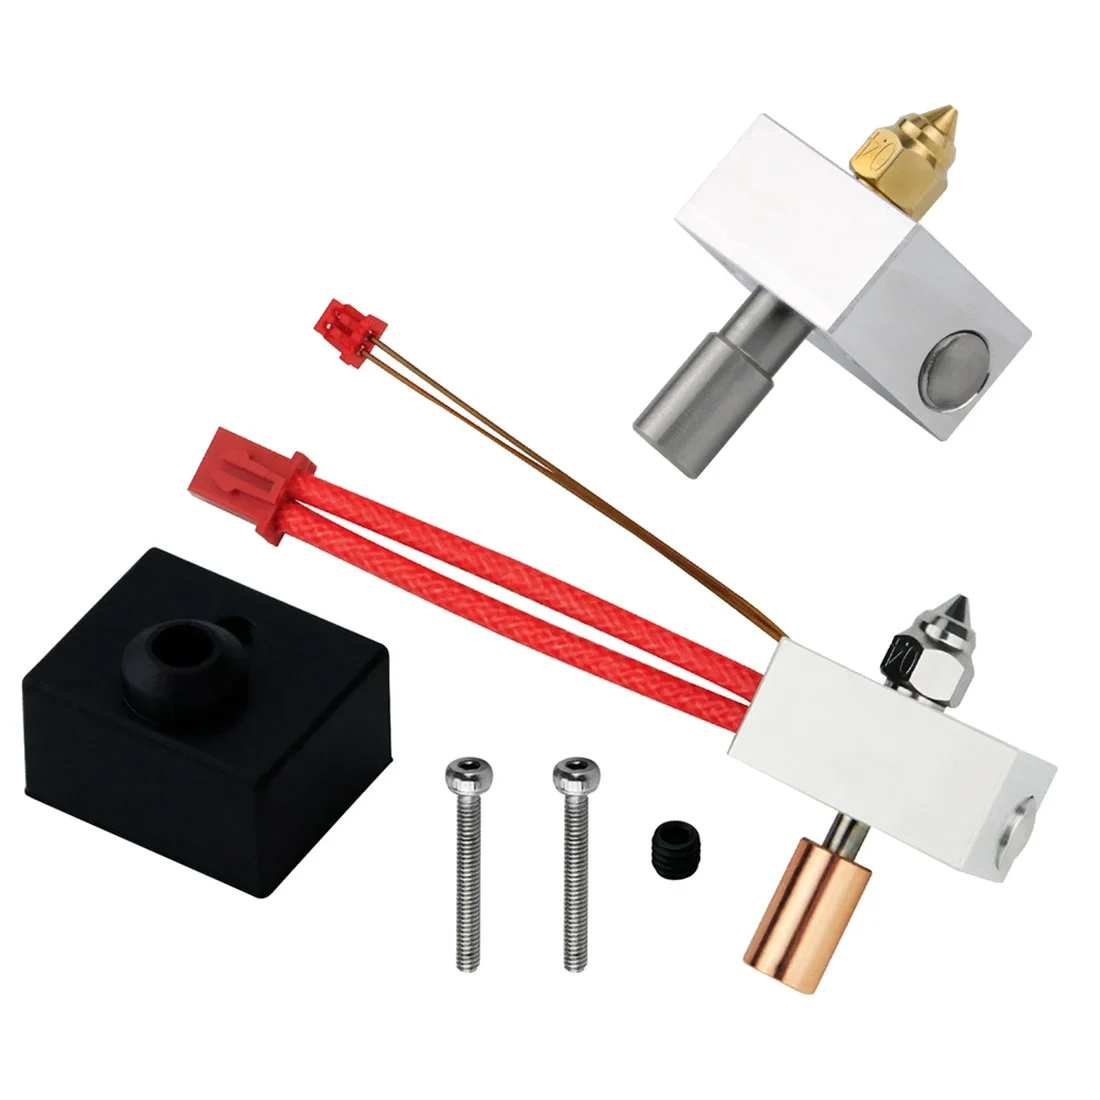 

High 300℃/Standard 260℃ Temperature Pro Heating Block Kit for Ender-3 S1 CR-10 Smart Pro Printer Hotend Kit With Sprite Extruder